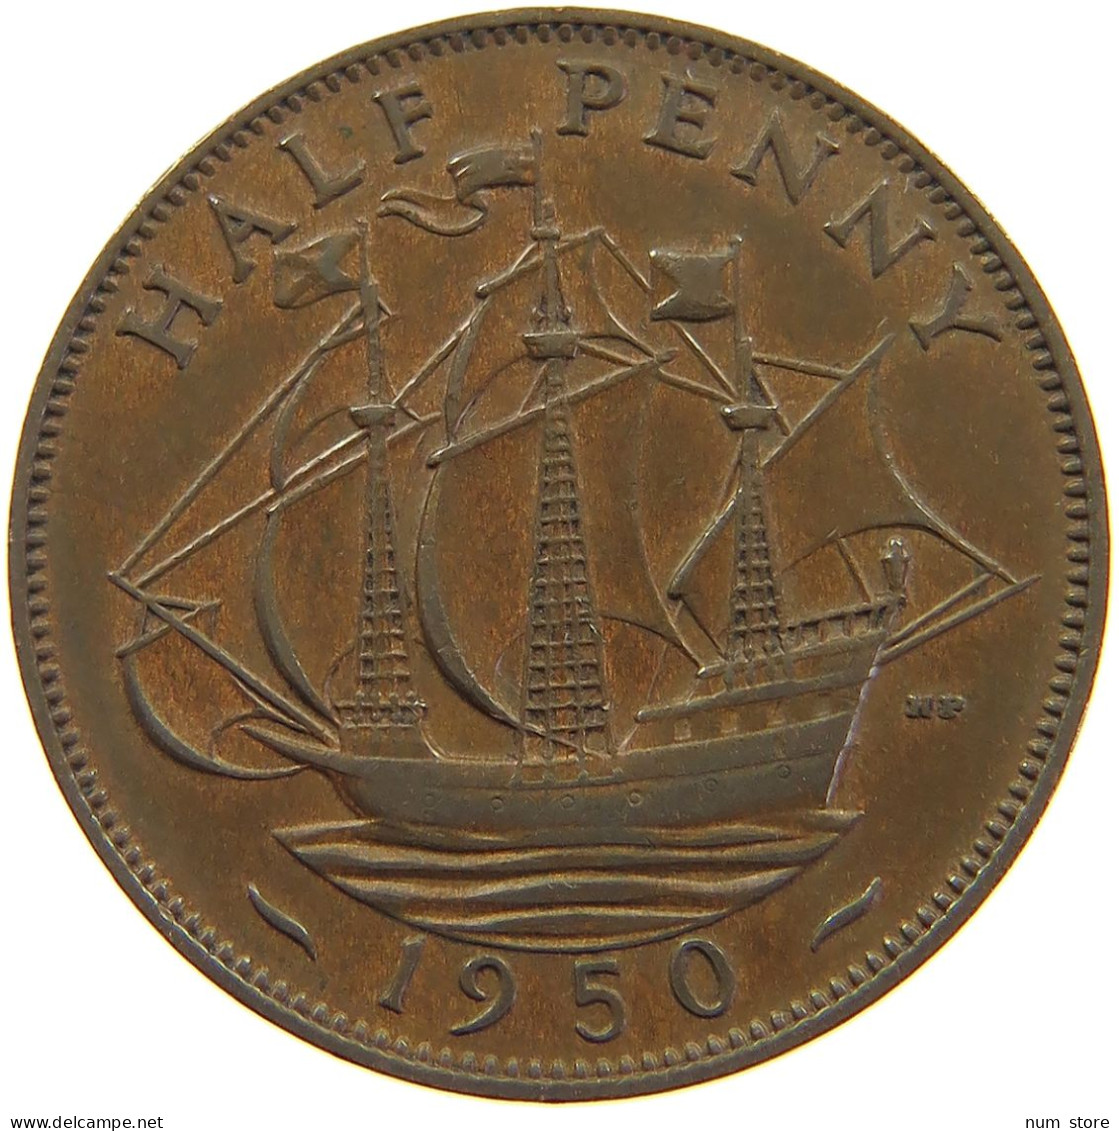 GREAT BRITAIN HALFPENNY 1950 #a062 0481 - C. 1/2 Penny